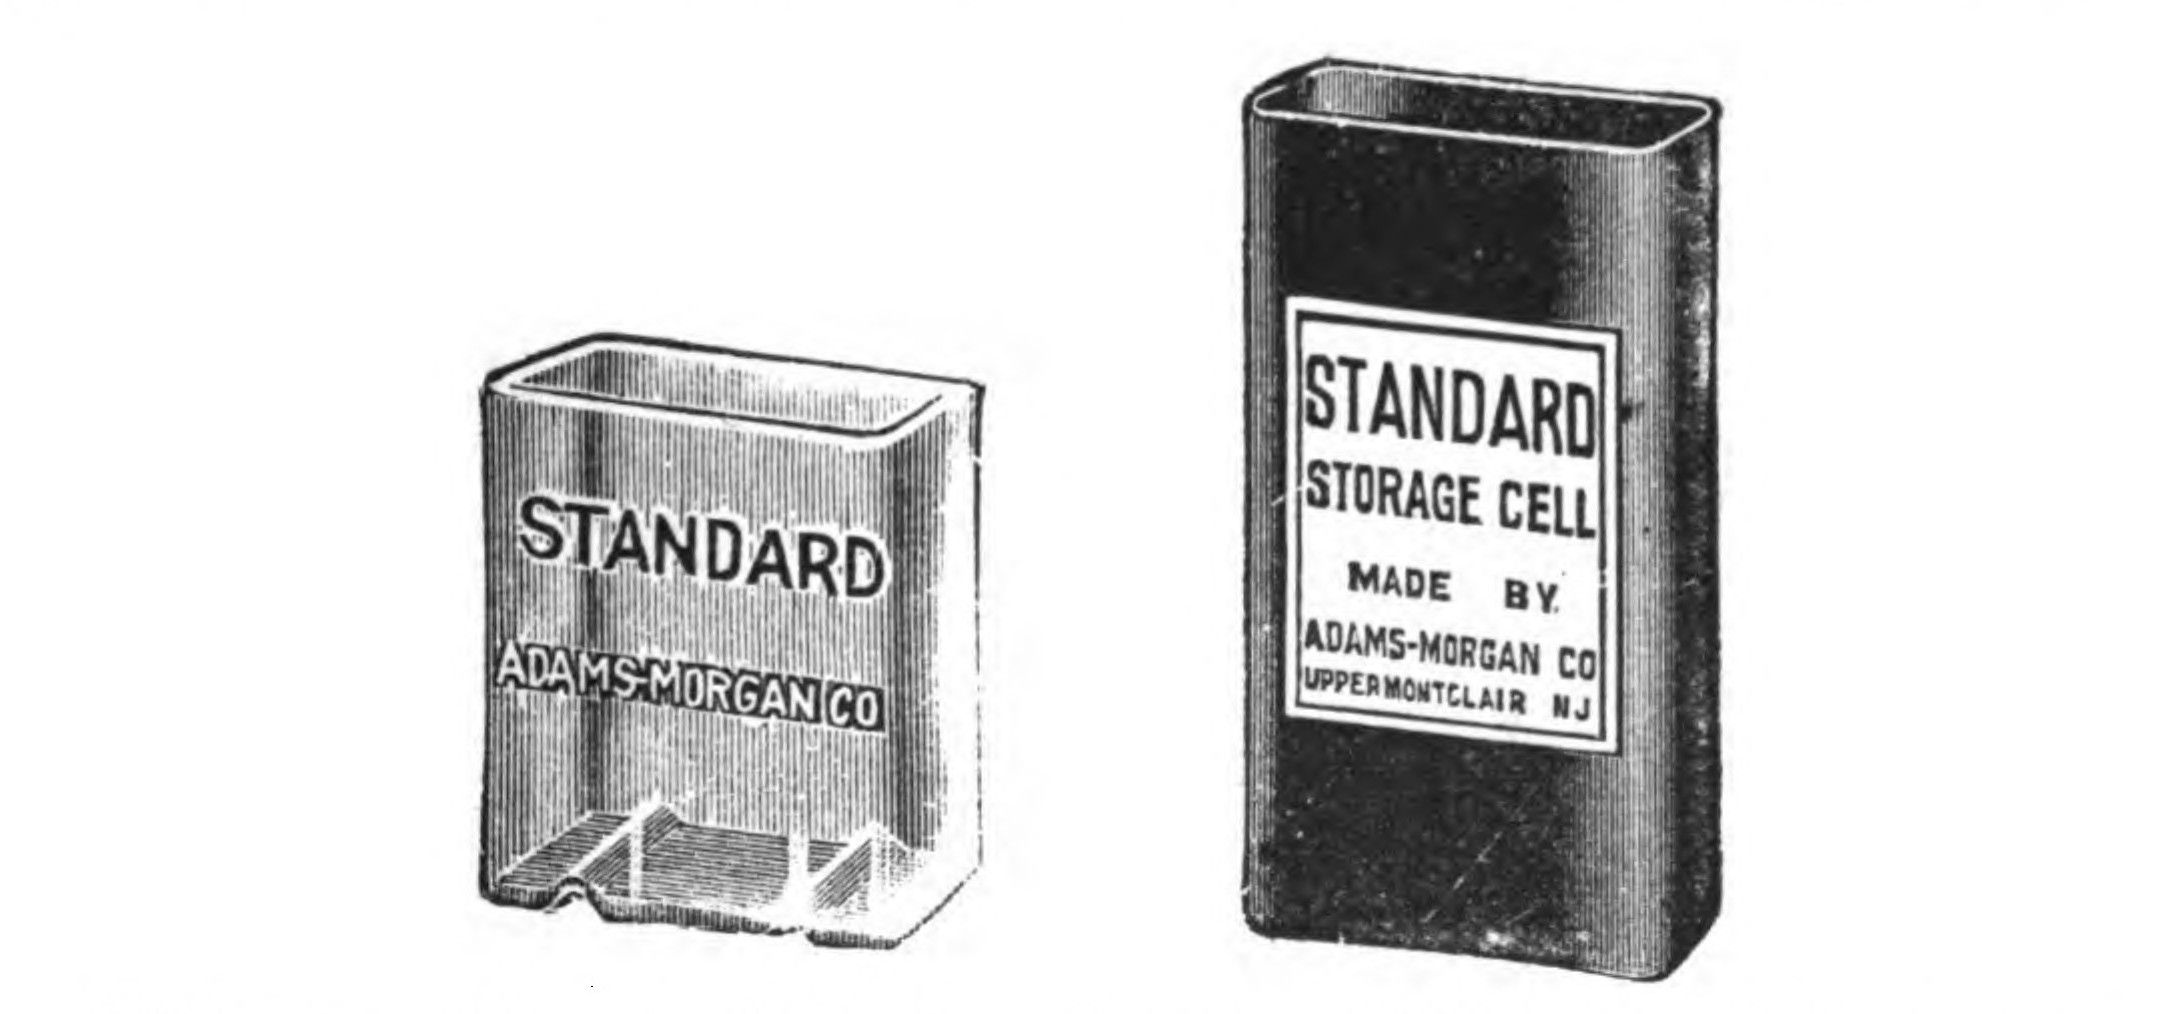 FIG. 41.—Glass and Rubber Storage Cell Jars which are on the market for the Electrical Experimenter and may be purchased very reasonably.